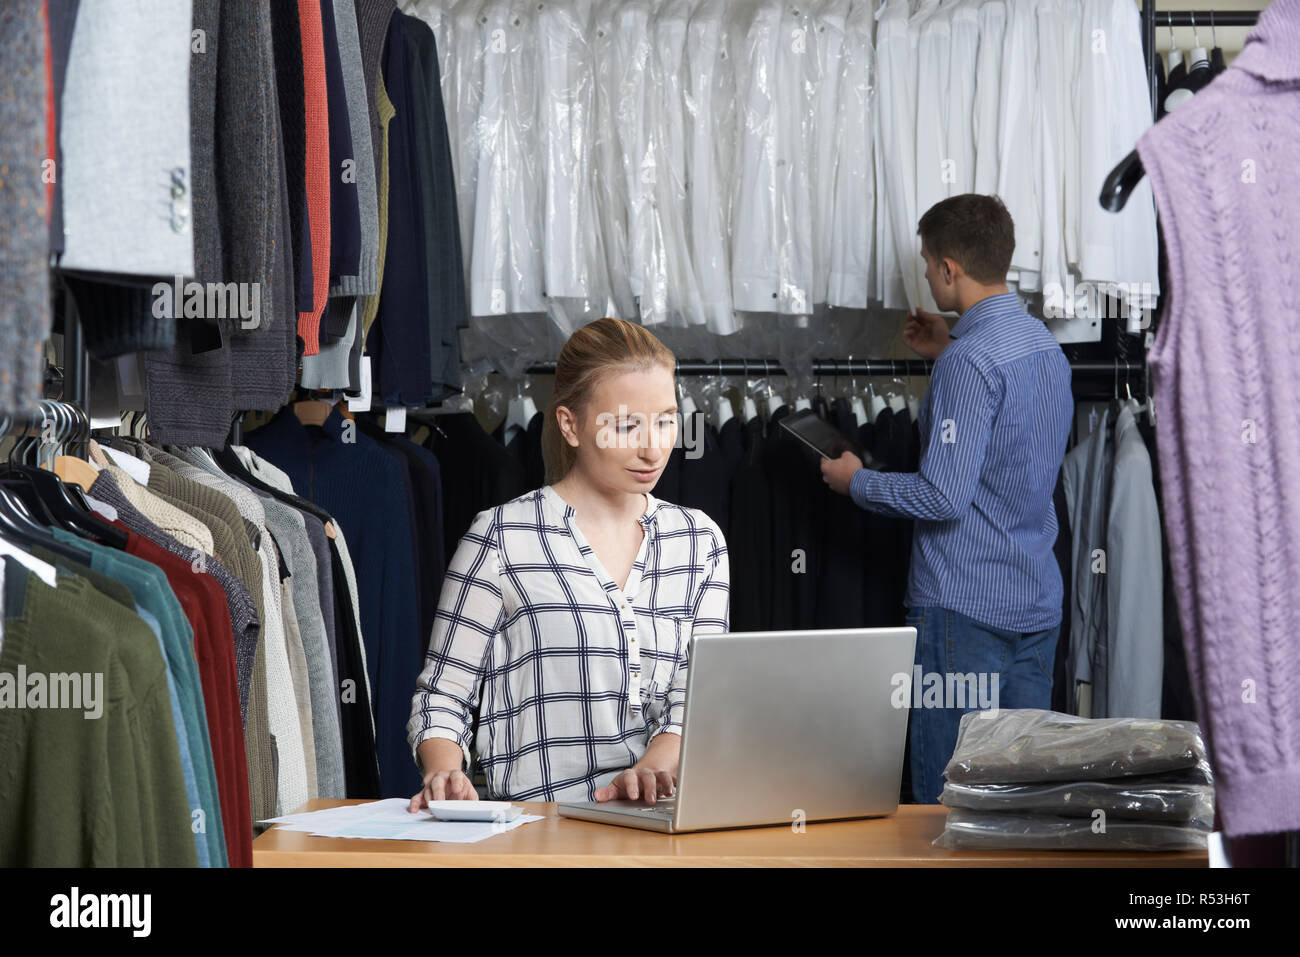 Couple Running On Line Fashion Business Working in Warehouse Banque D'Images